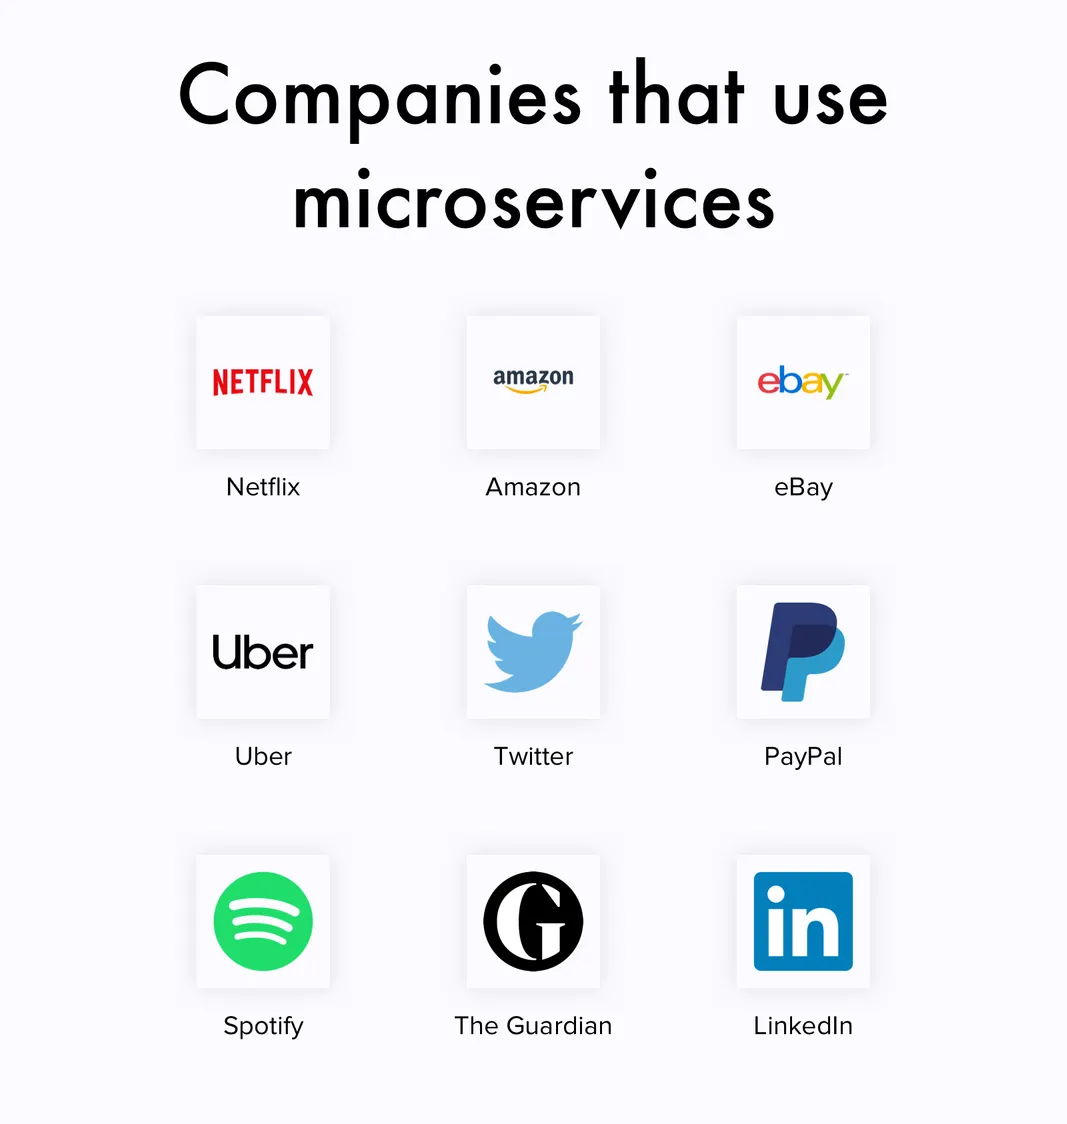 Companies with microservices architecture